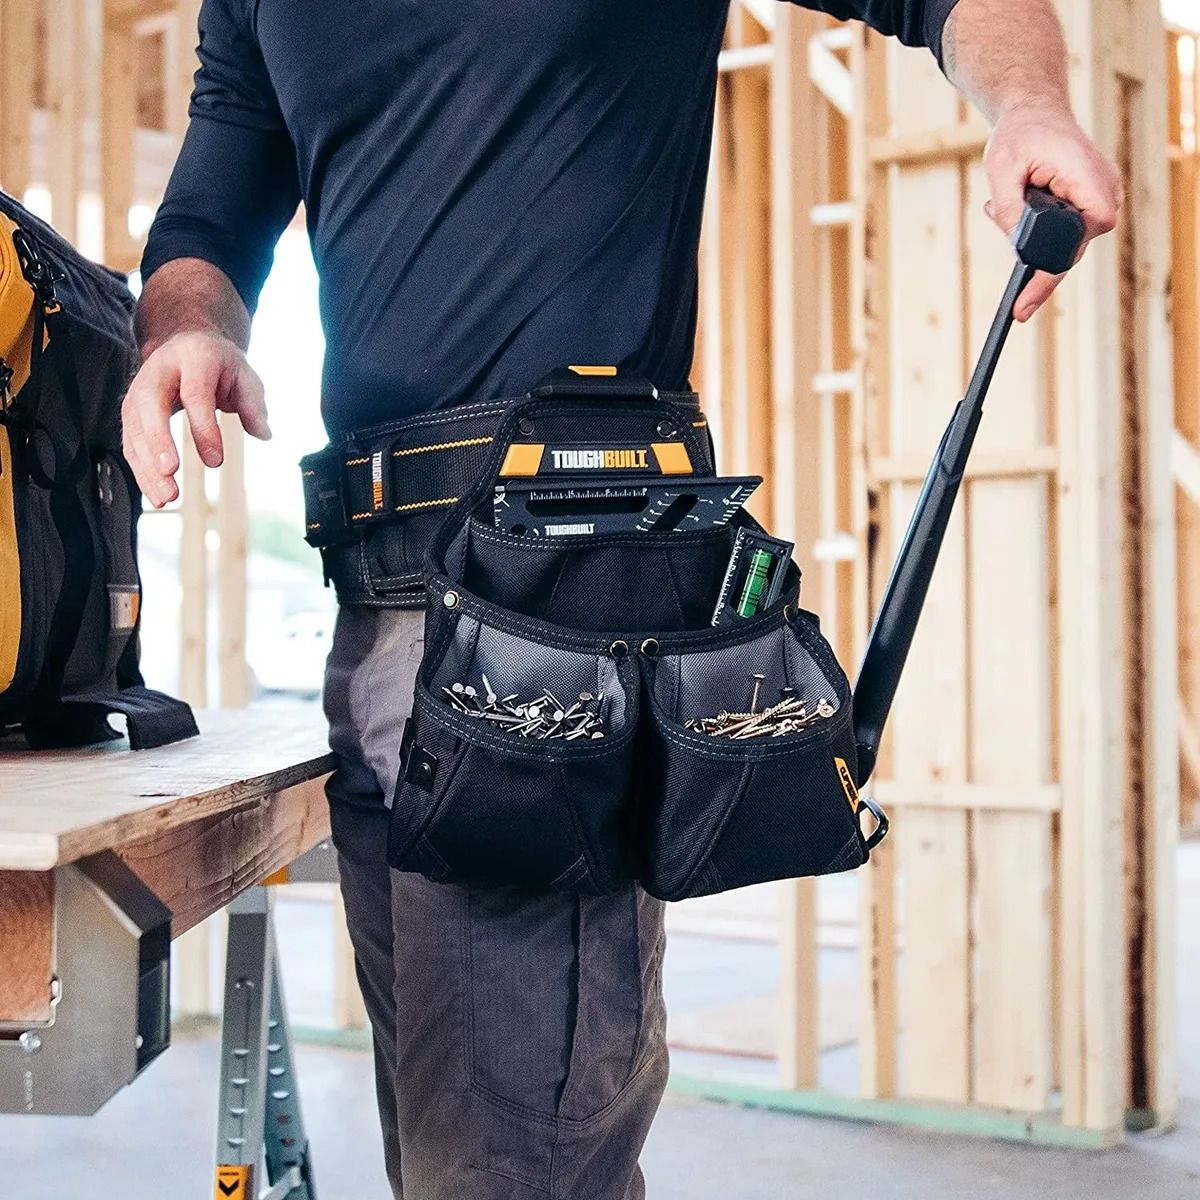 How Do You Purchase A Tough Built Tool Belt